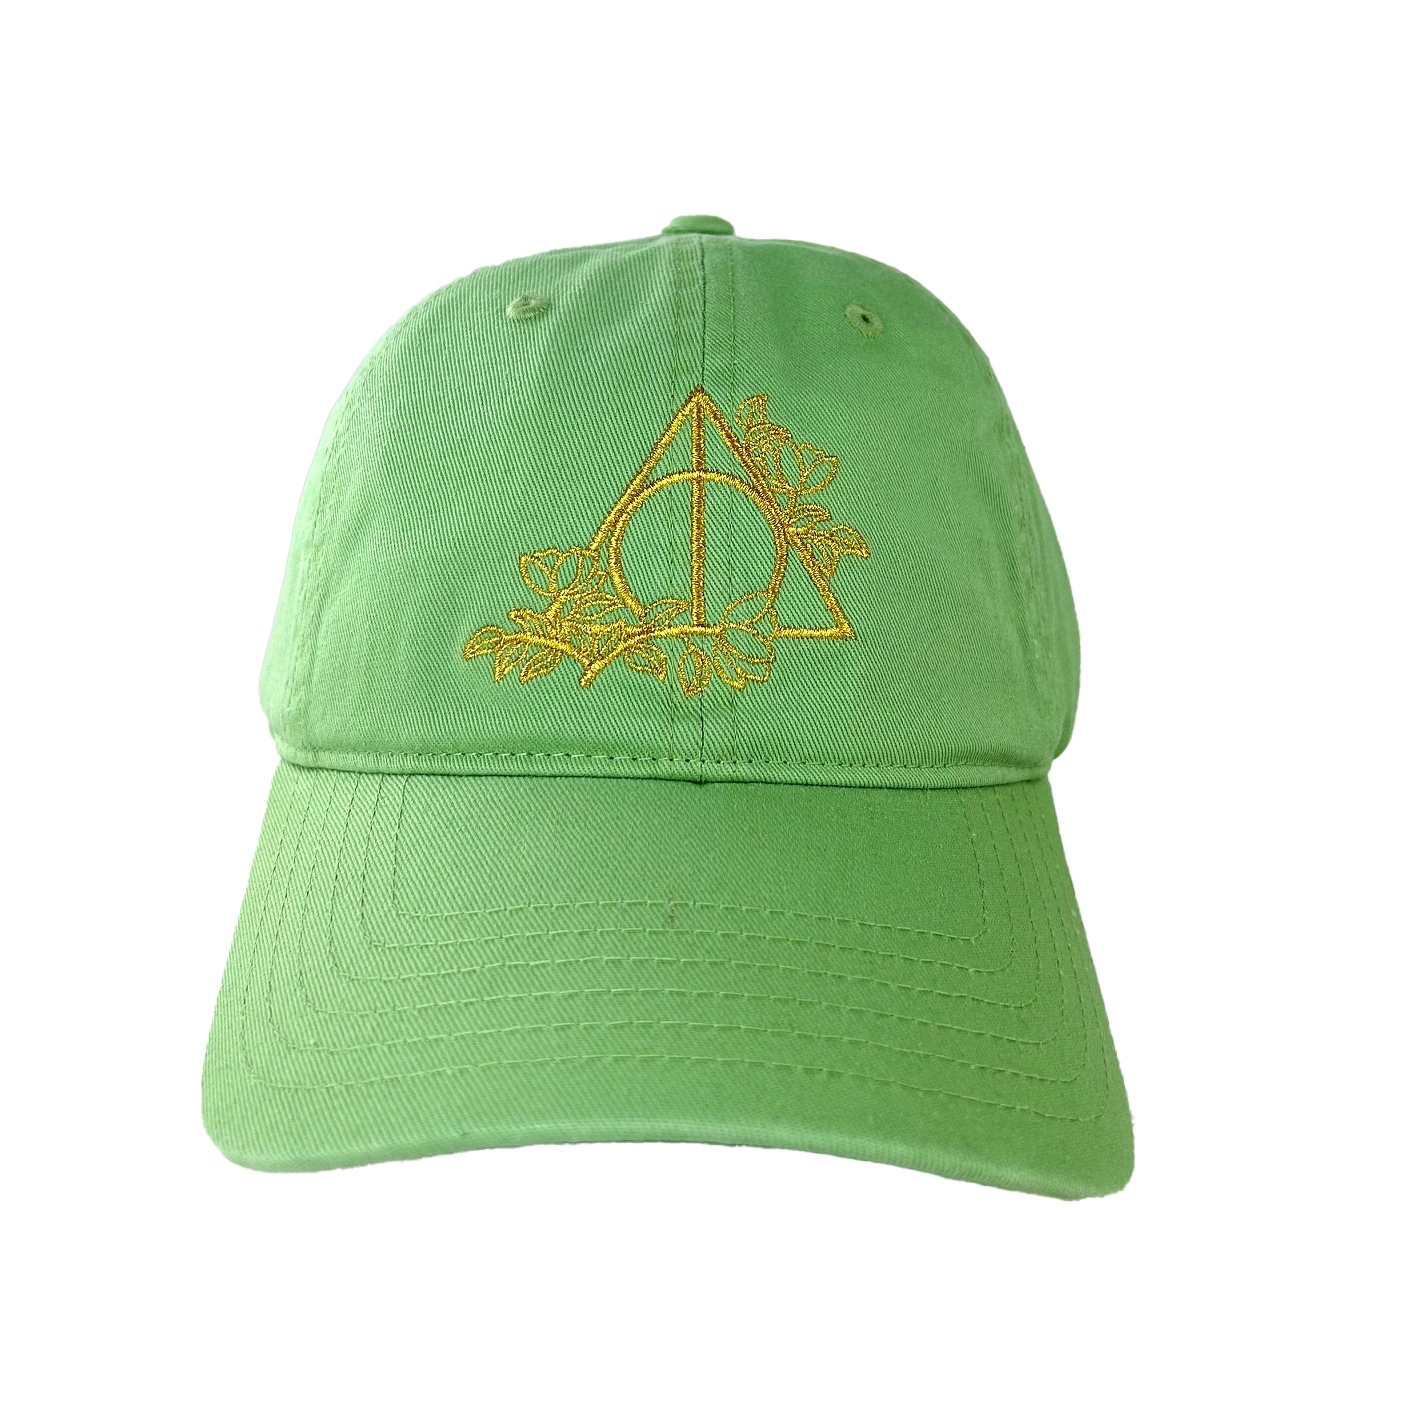 Harry Potter Floral Deathly Hallows Cap